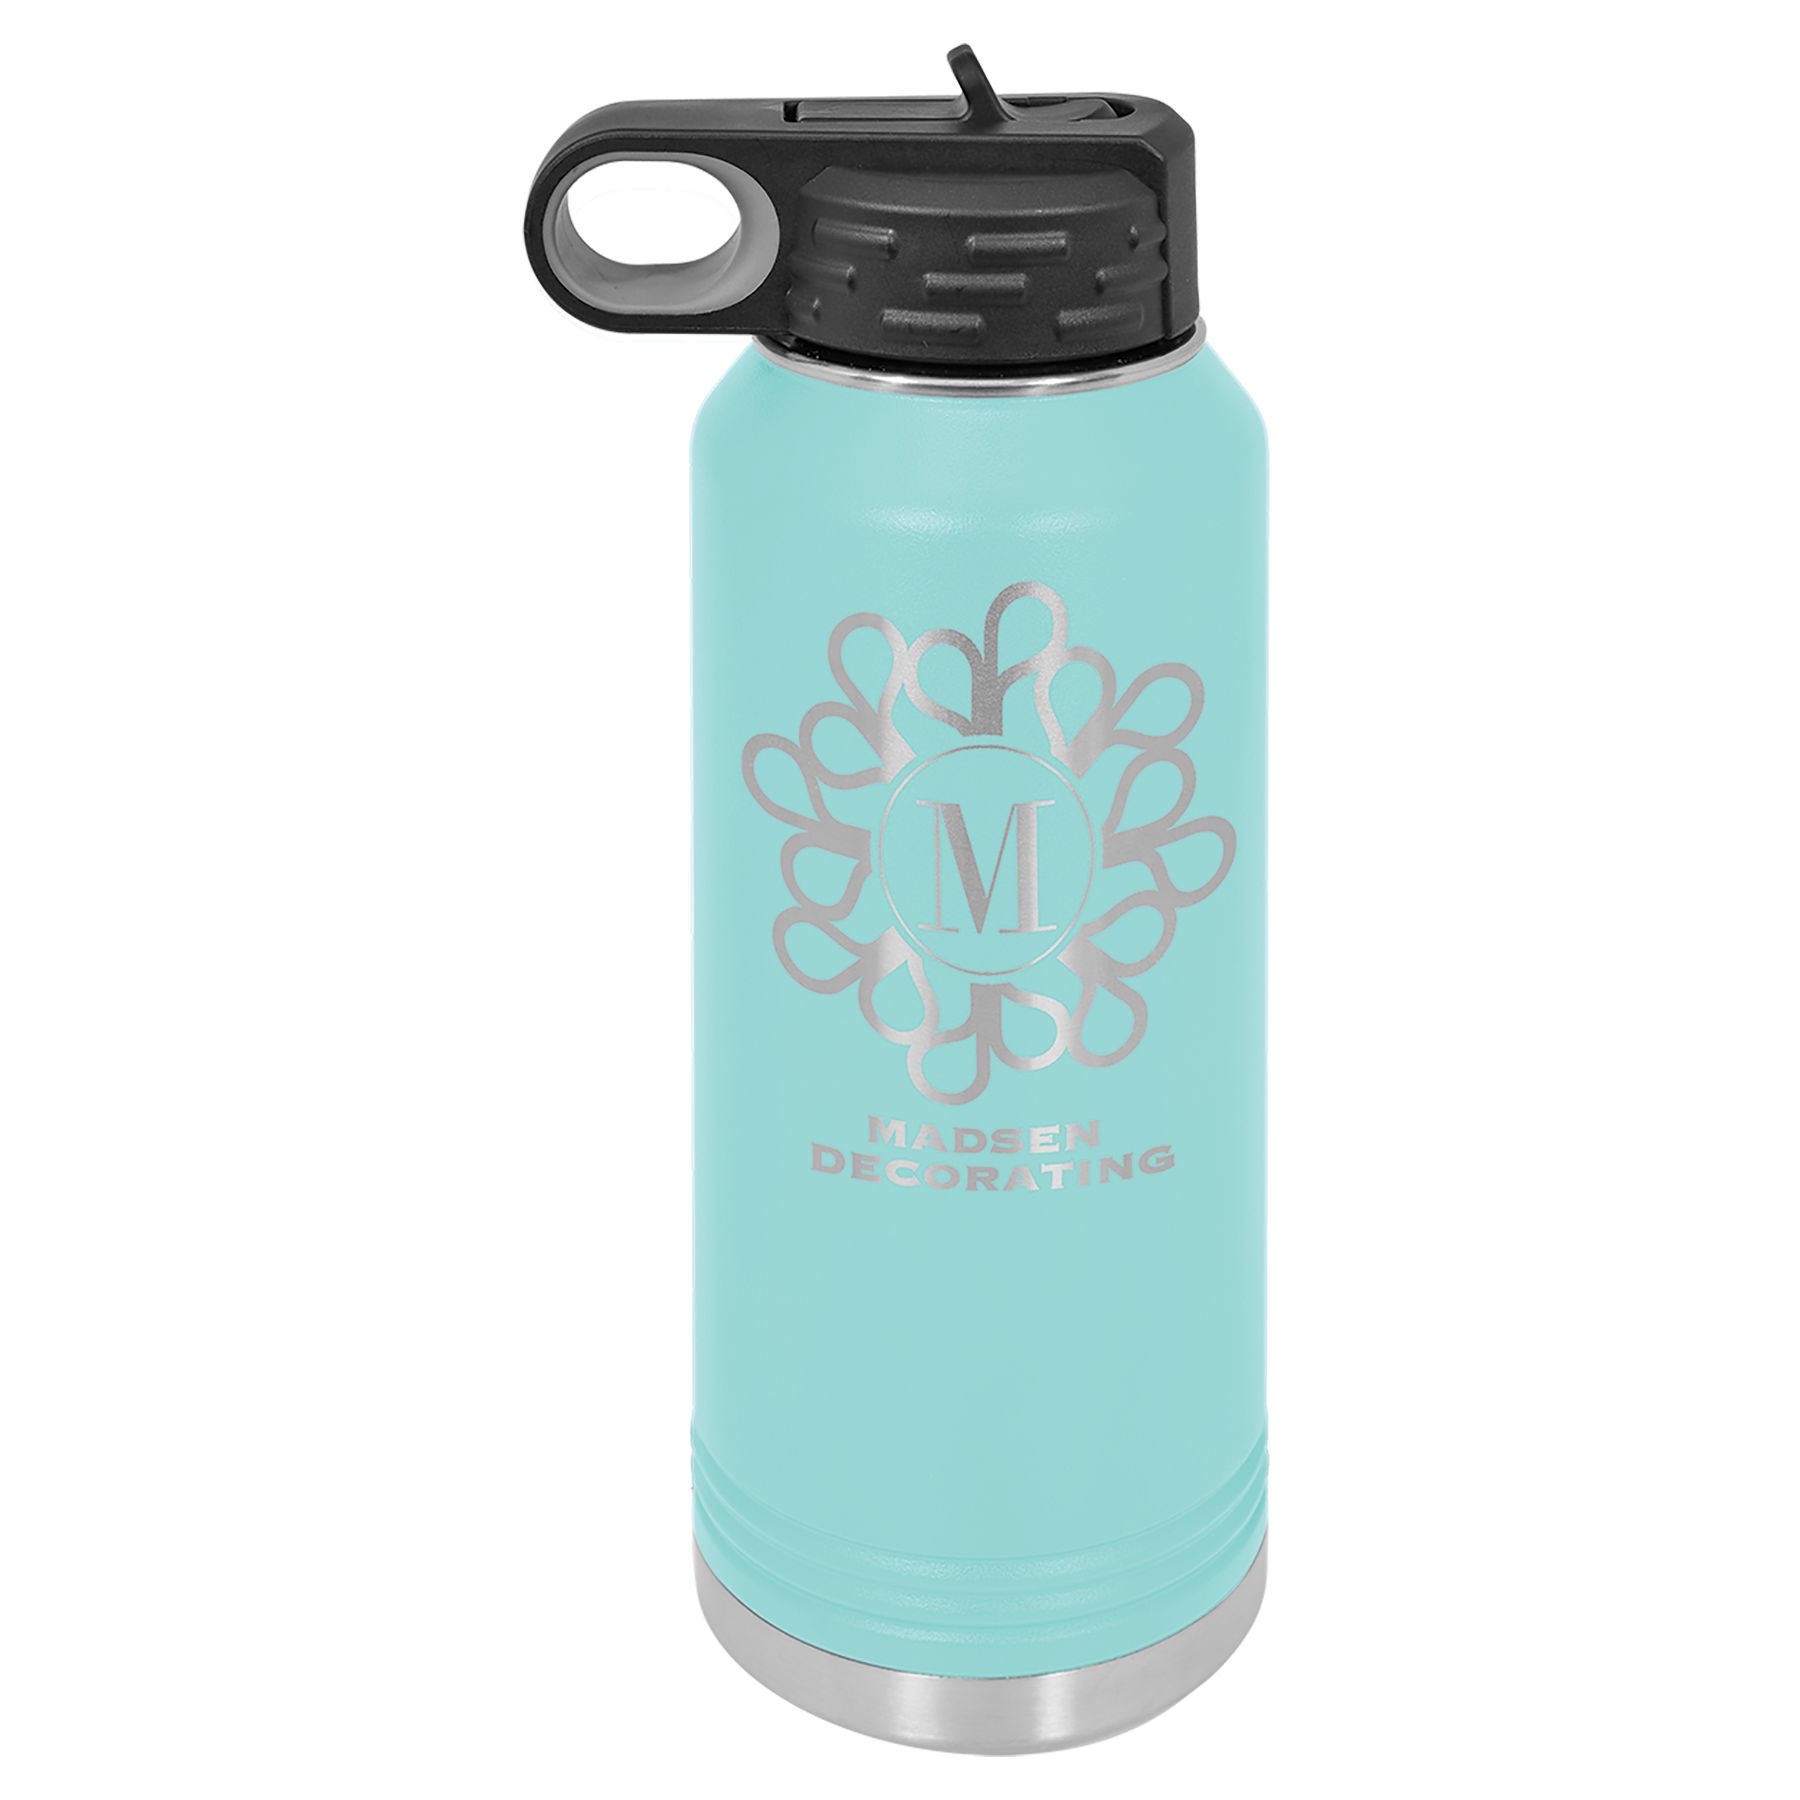 32 oz. Teal Stainless Steel Insulated Water Bottler.  Customizable with your personal image or saying.